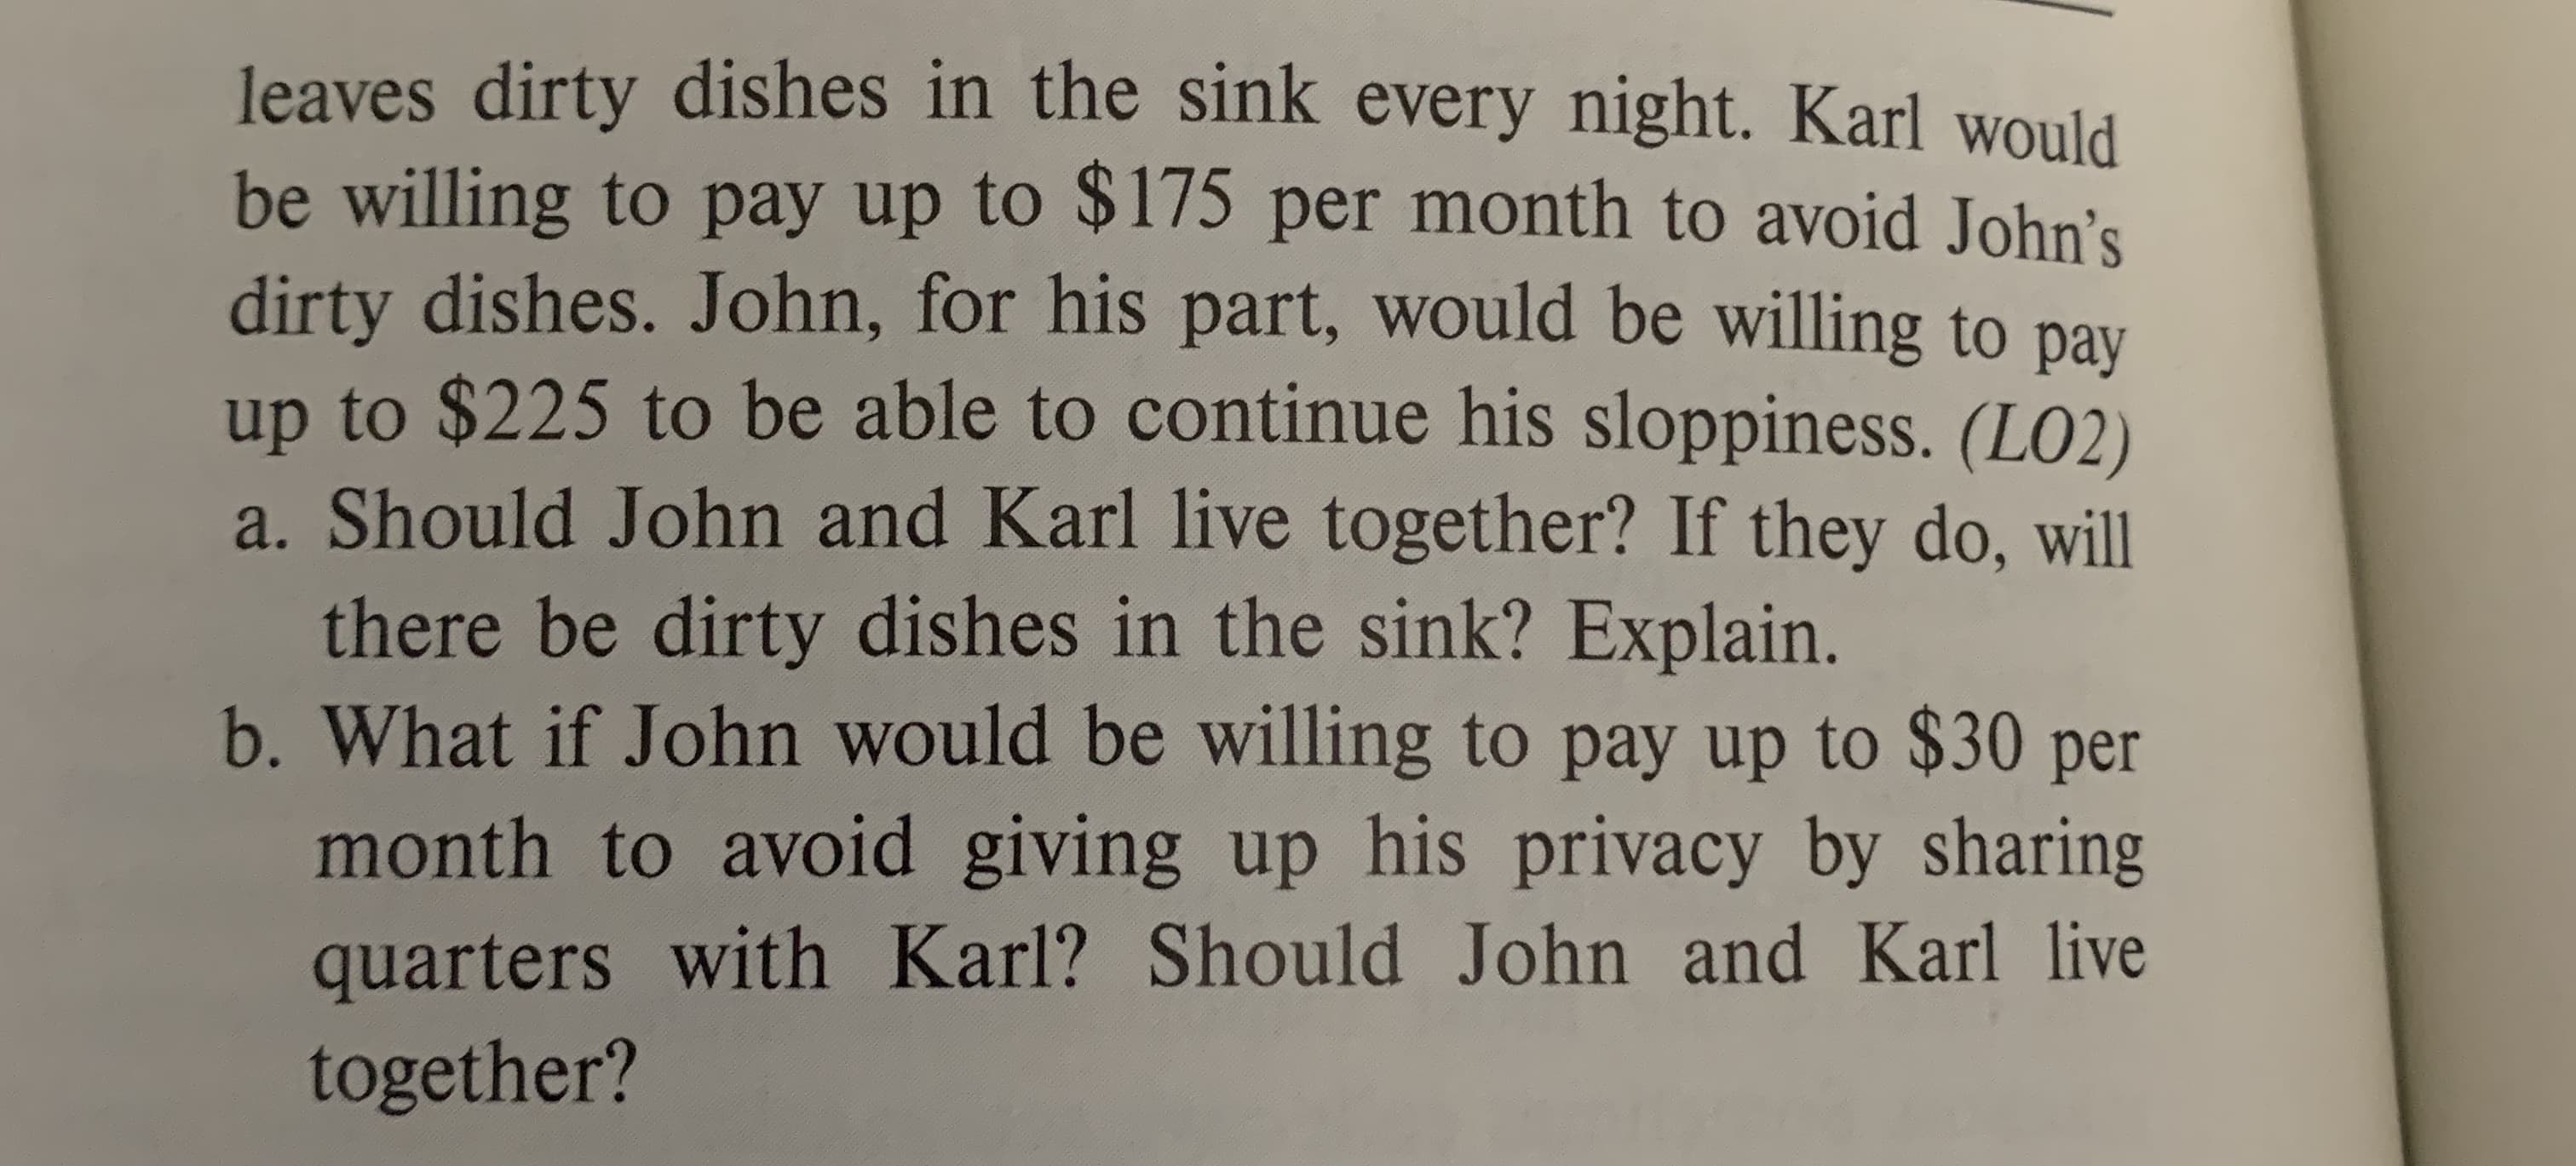 leaves dirty dishes in the sink every night. Karl would
be willing to pay up to $175 per month to avoid John's
dirty dishes. John, for his part, would be willing to pay
up to $225 to be able to continue his sloppiness. (LO2)
a. Should John and Karl live together? If they do, will
there be dirty dishes in the sink? Explain.
b.What if John would be willing to pay up to $30 per
month to avoid giving up his privacy by sharing
quarters with Karl? Should John and Karl live
together?
